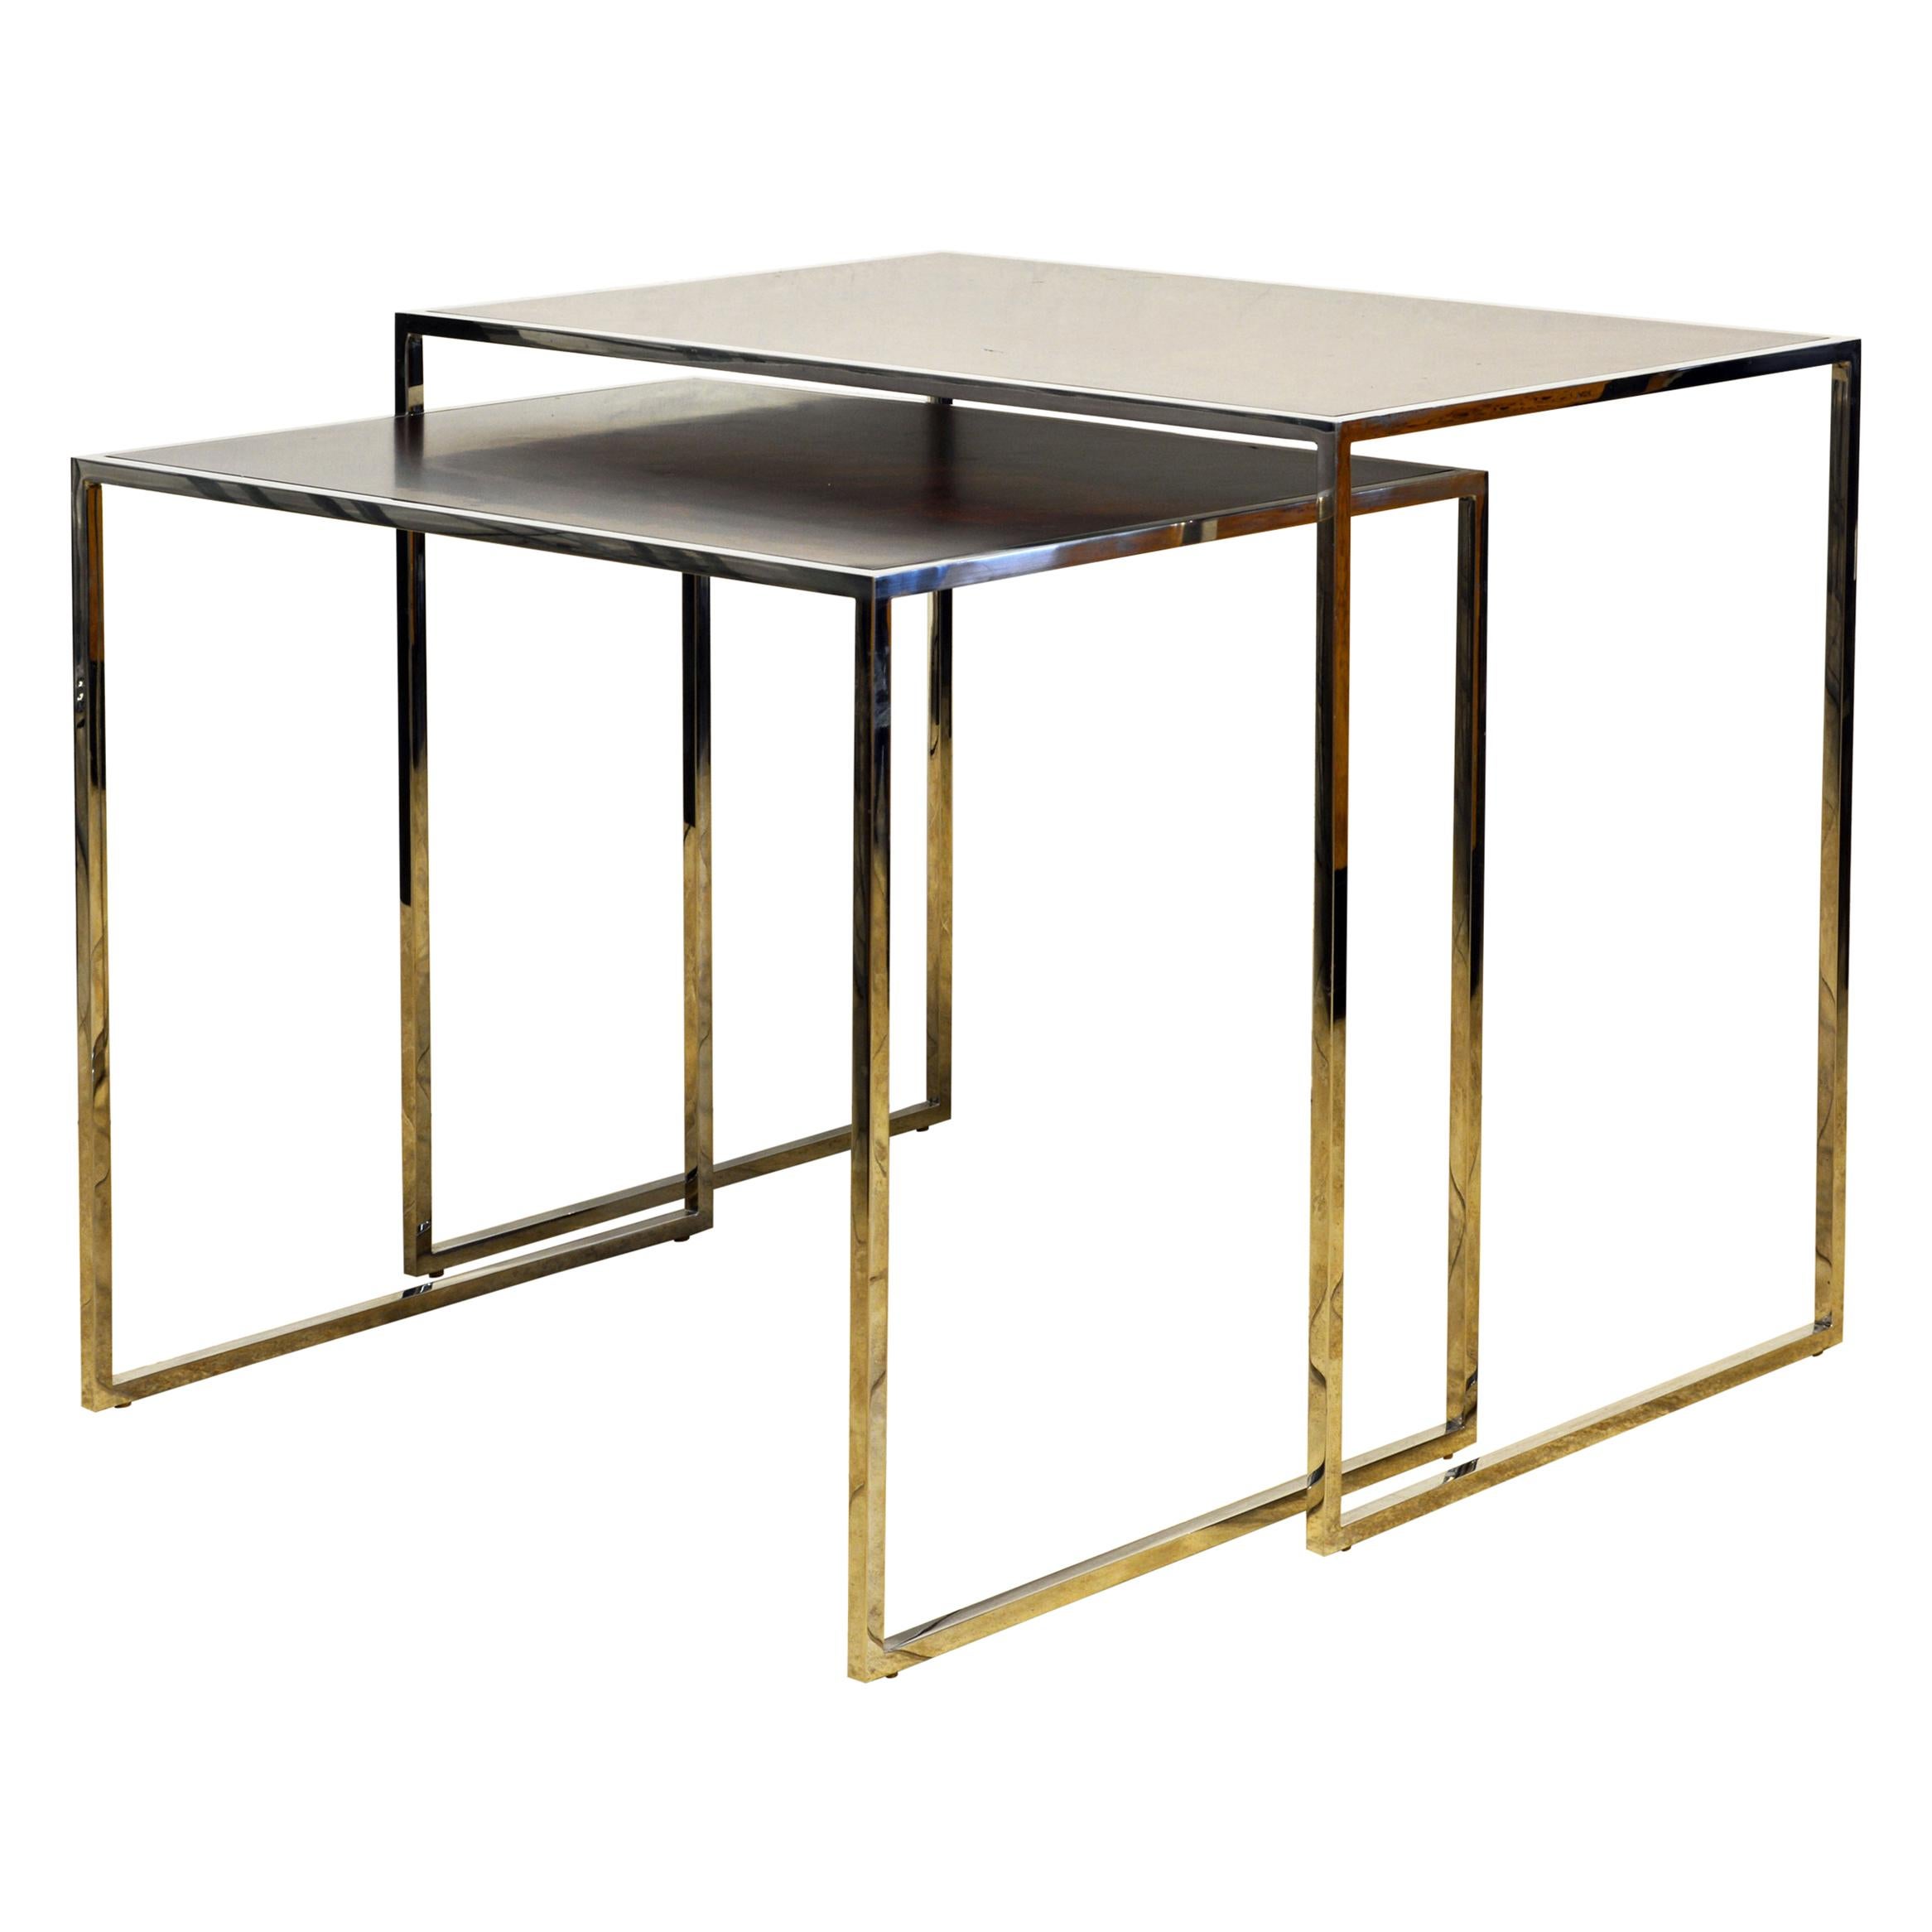 Two Elegant Nesting Tables by Michael Kirkpatrick for Decca Bolier Collection